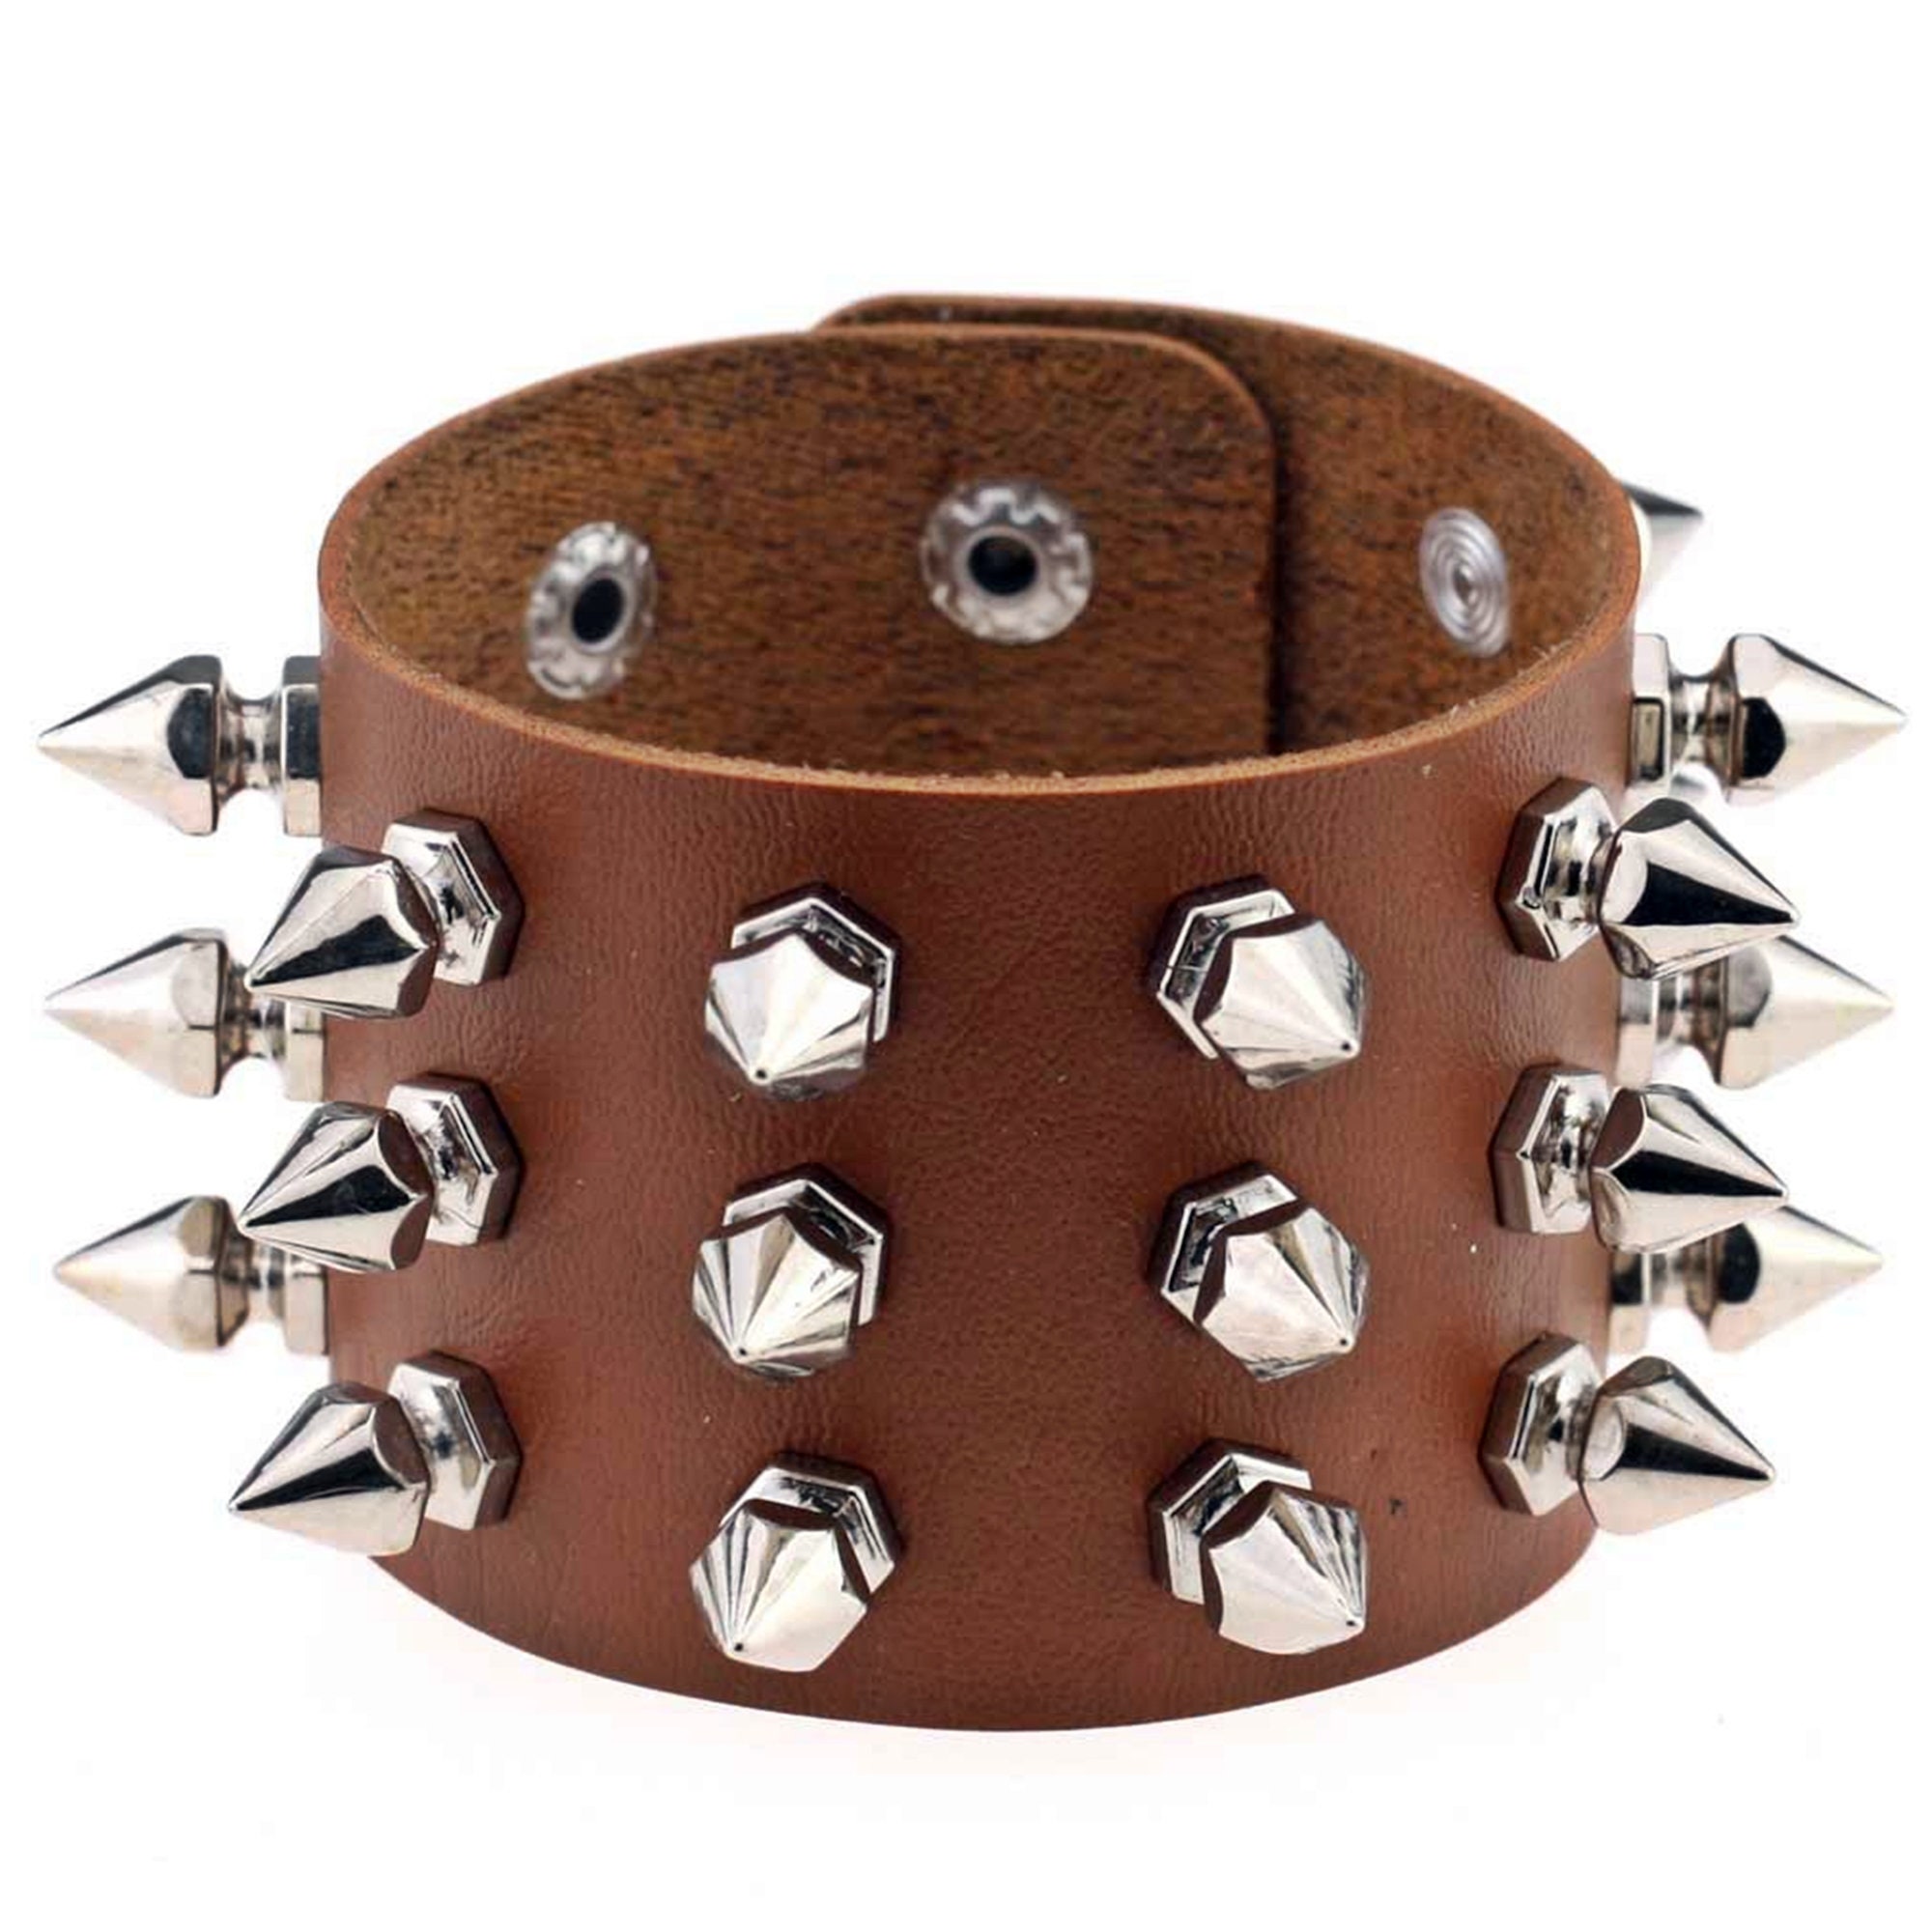 Punk Gothic Rock Cuspidal Spikes Rivet Cone Stud Wide Leather - Etsy